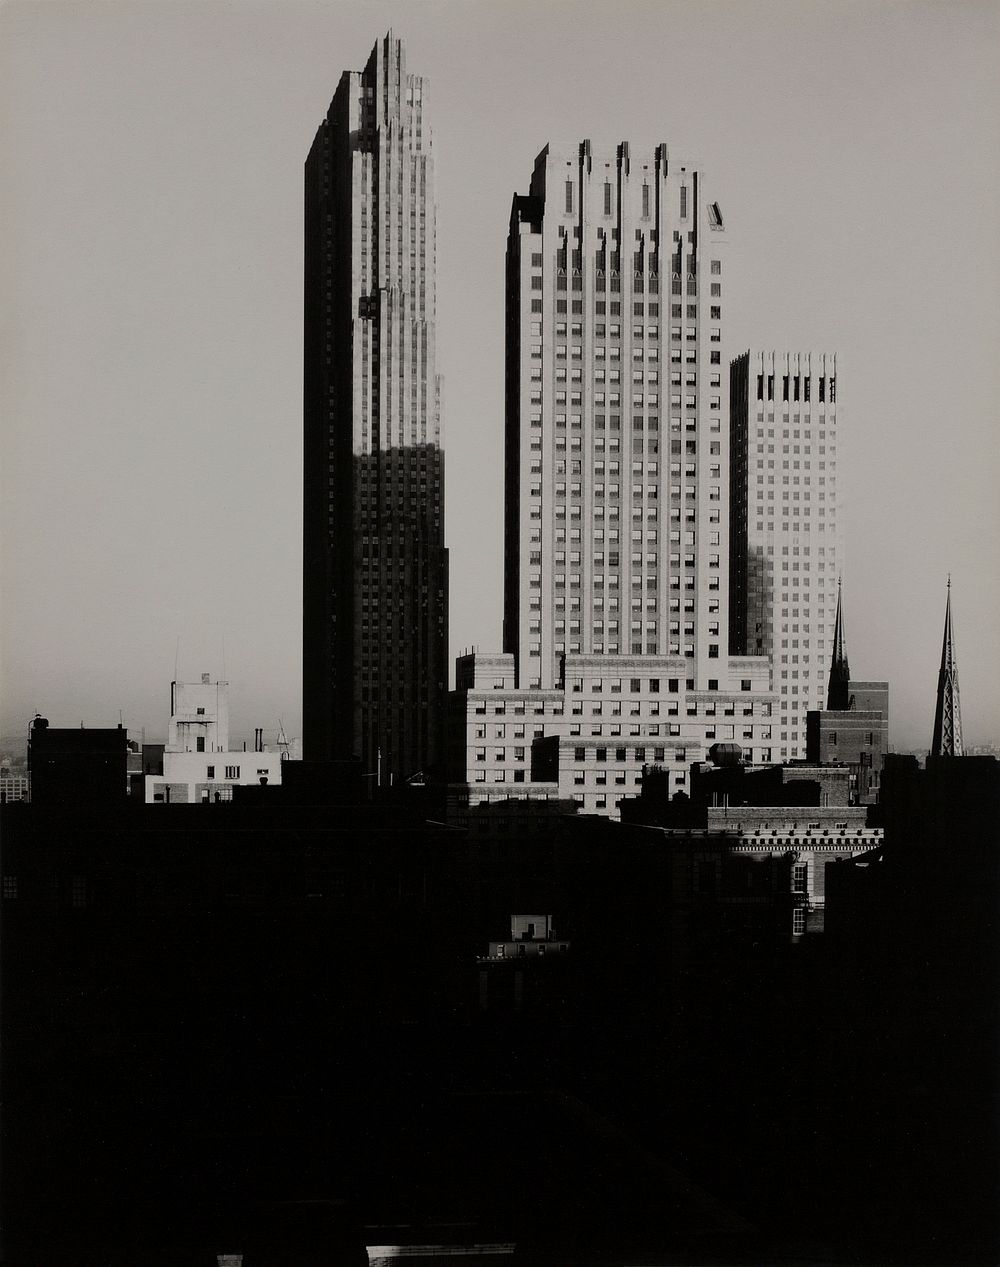 New York from the Shelton (1935) photo in high resolution by Alfred Stieglitz. Original from the Saint Louis Art Museum.…